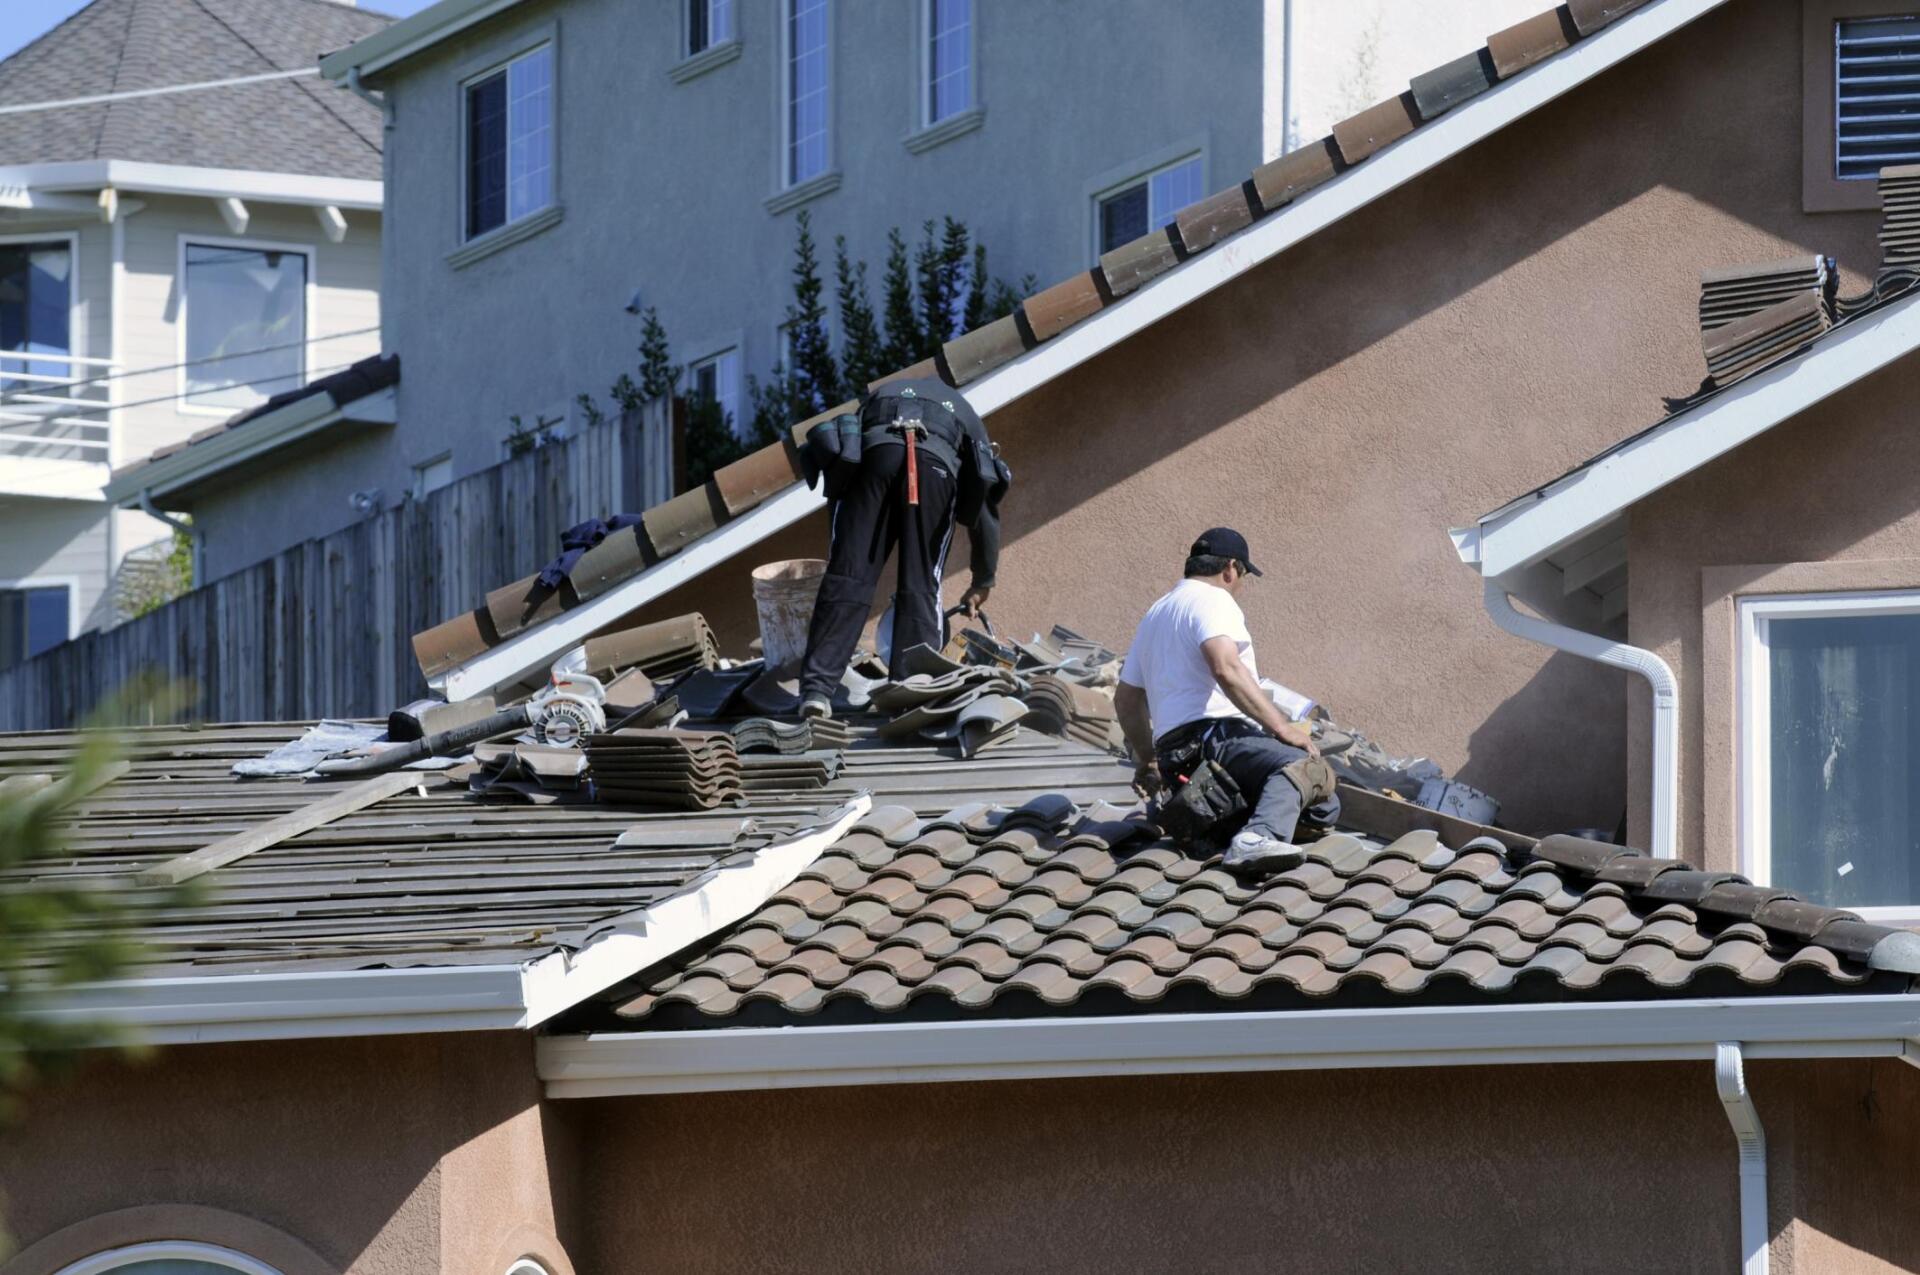 workers checking the roof